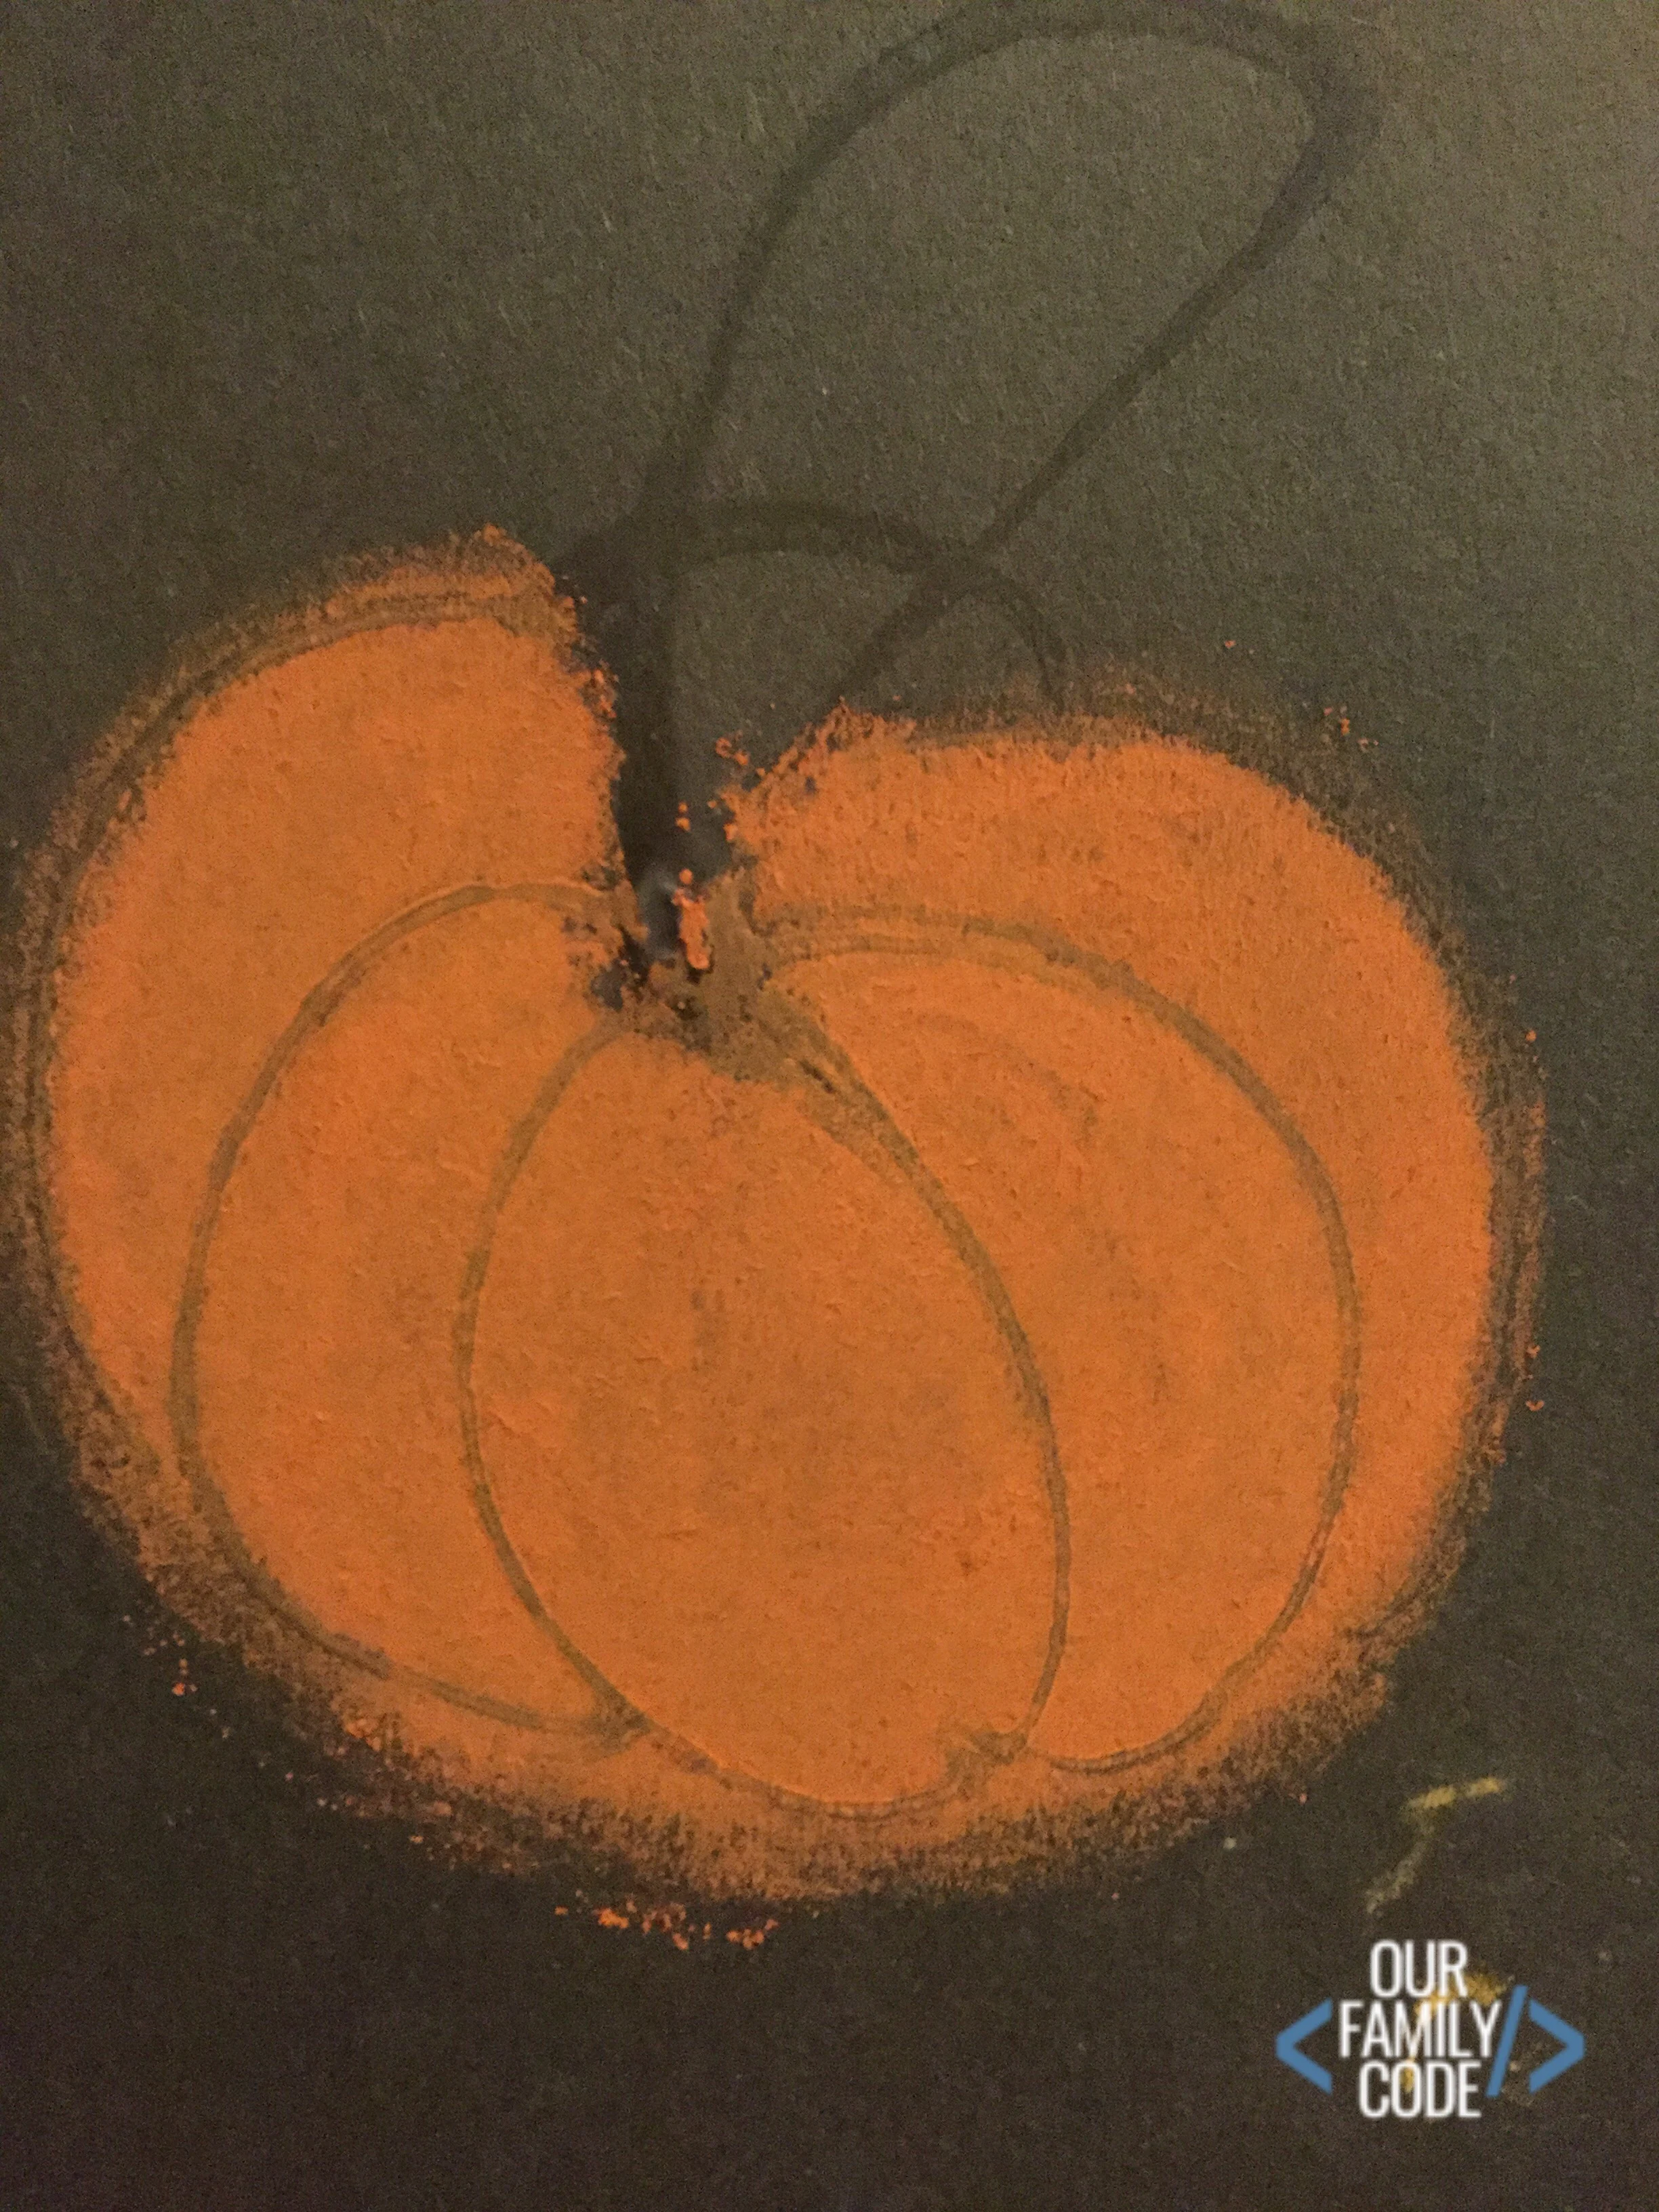 A picture of a pumpkin made with glue and blended with orange chalk.